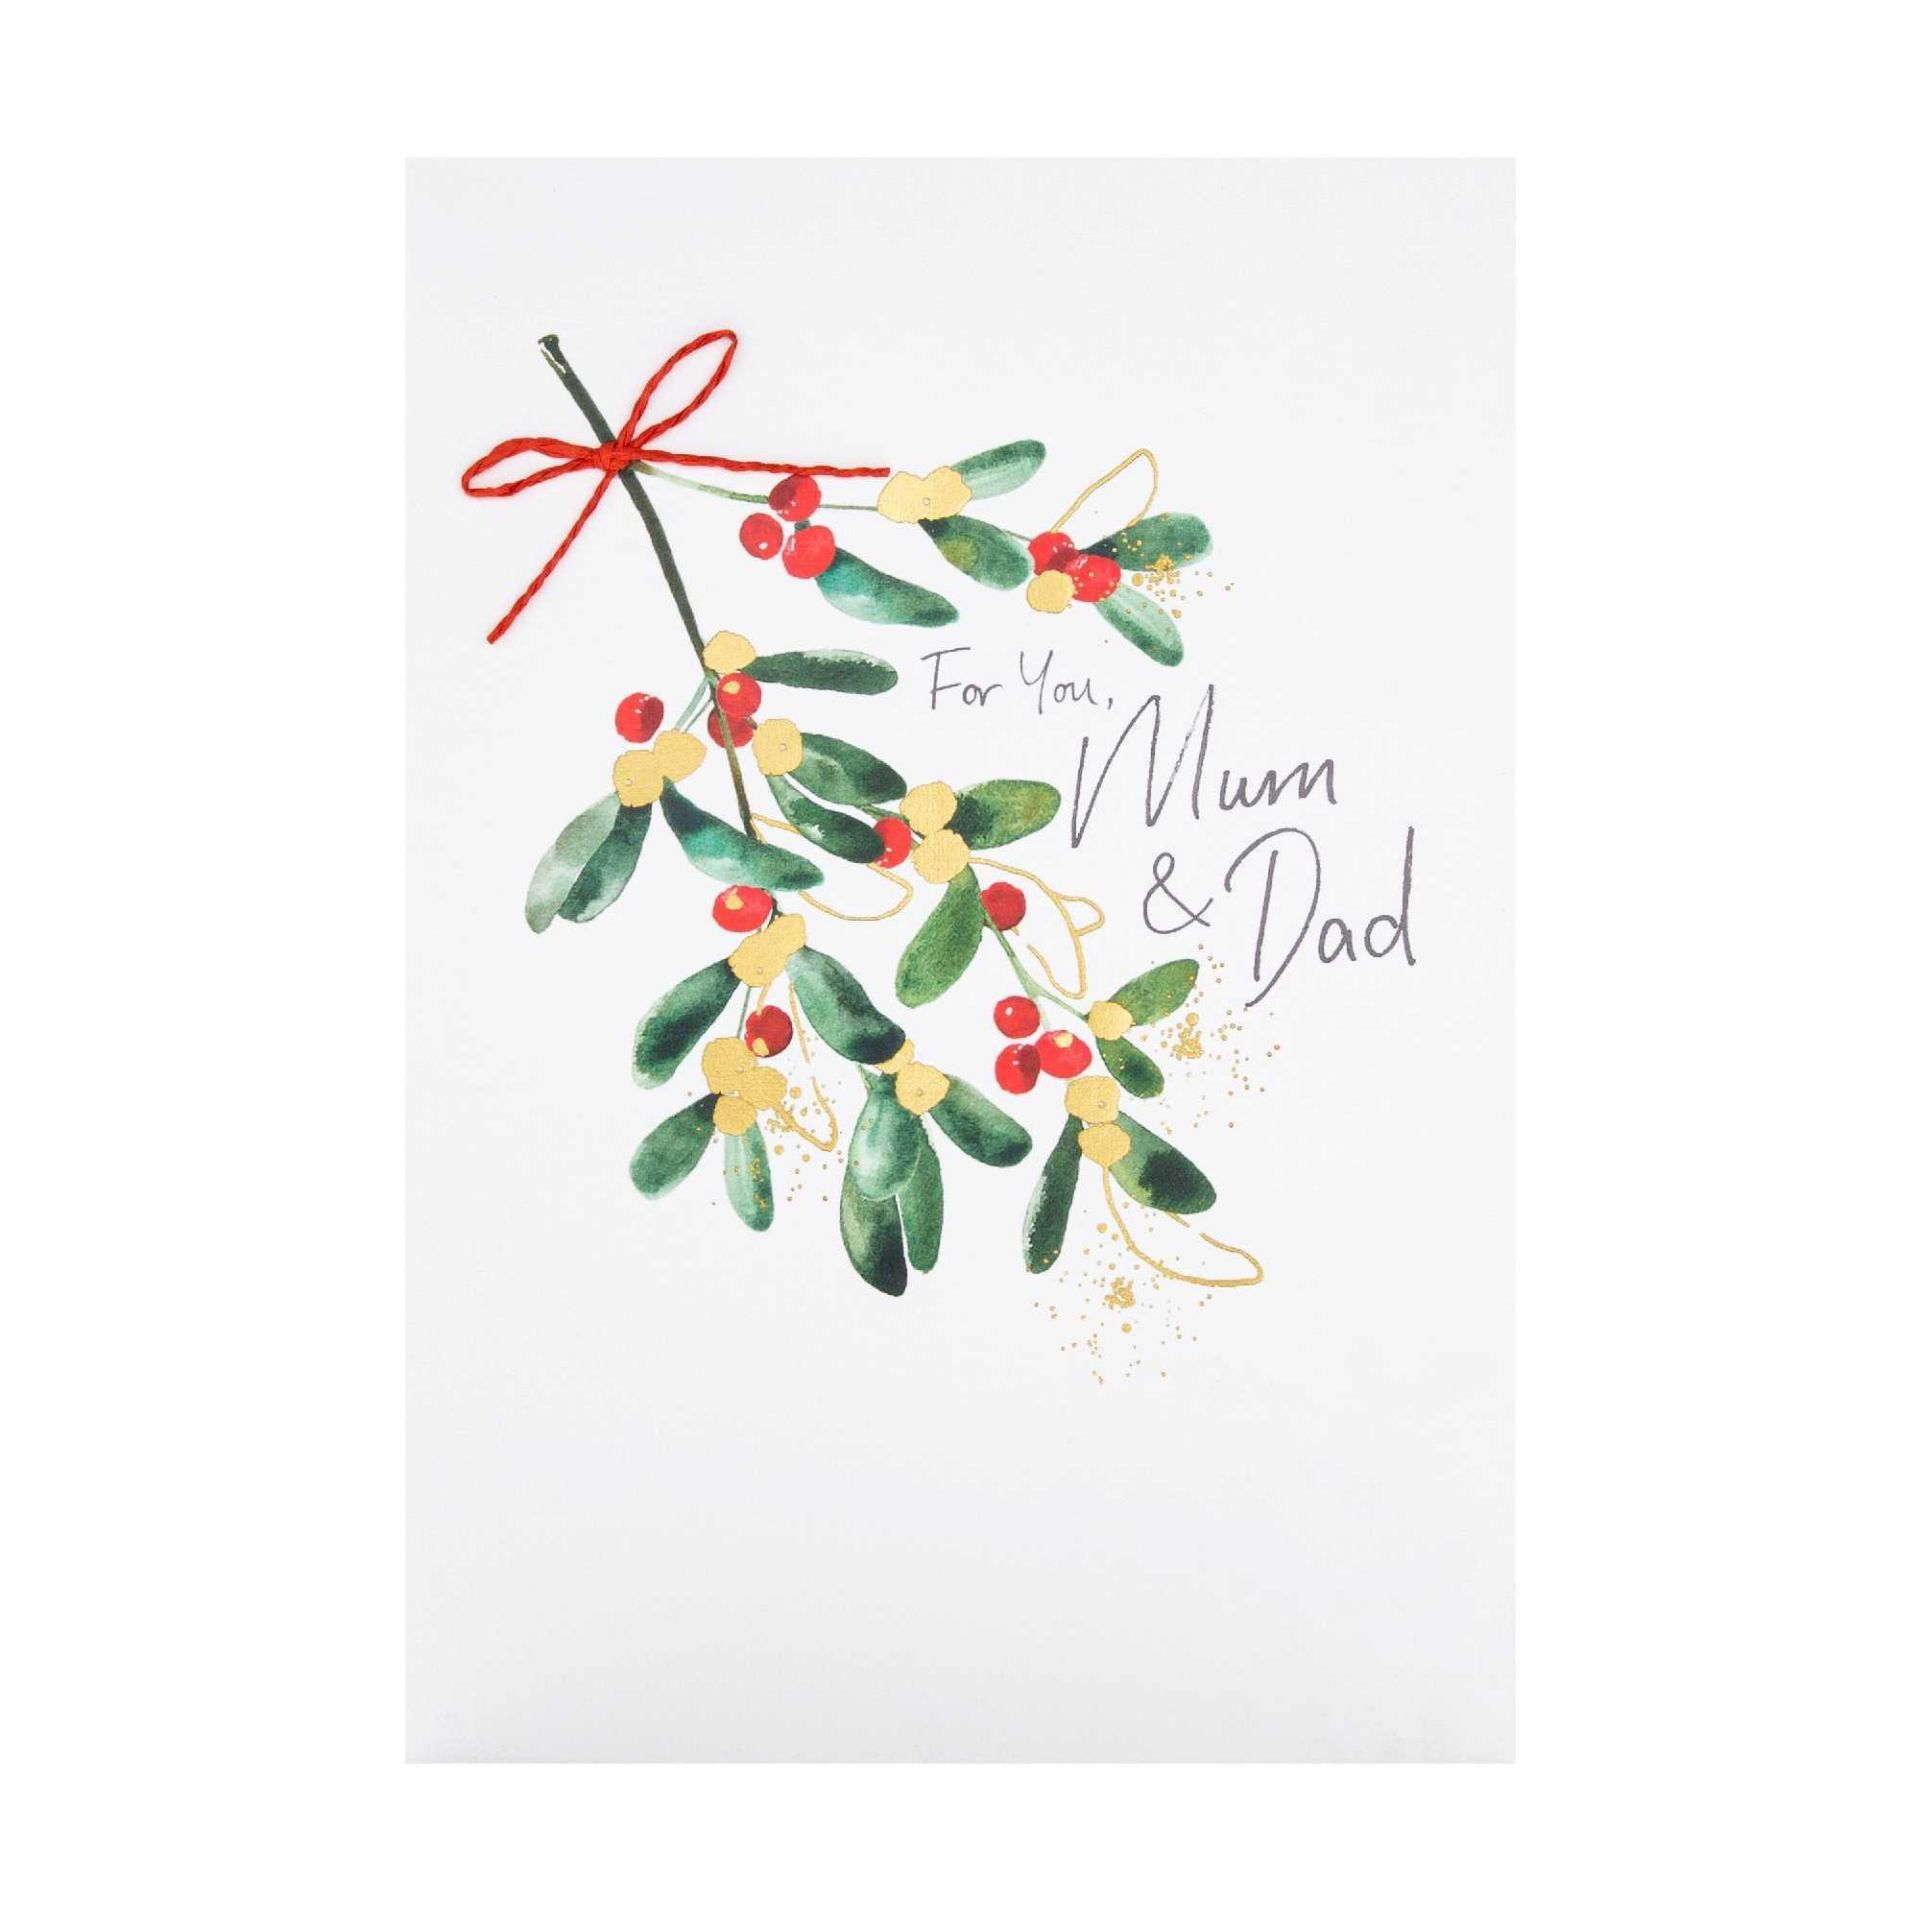 RRP £595 Brand New And Sealed (252 Items) Christmas Card For Mum And Dad From Hallmark - Illustrated